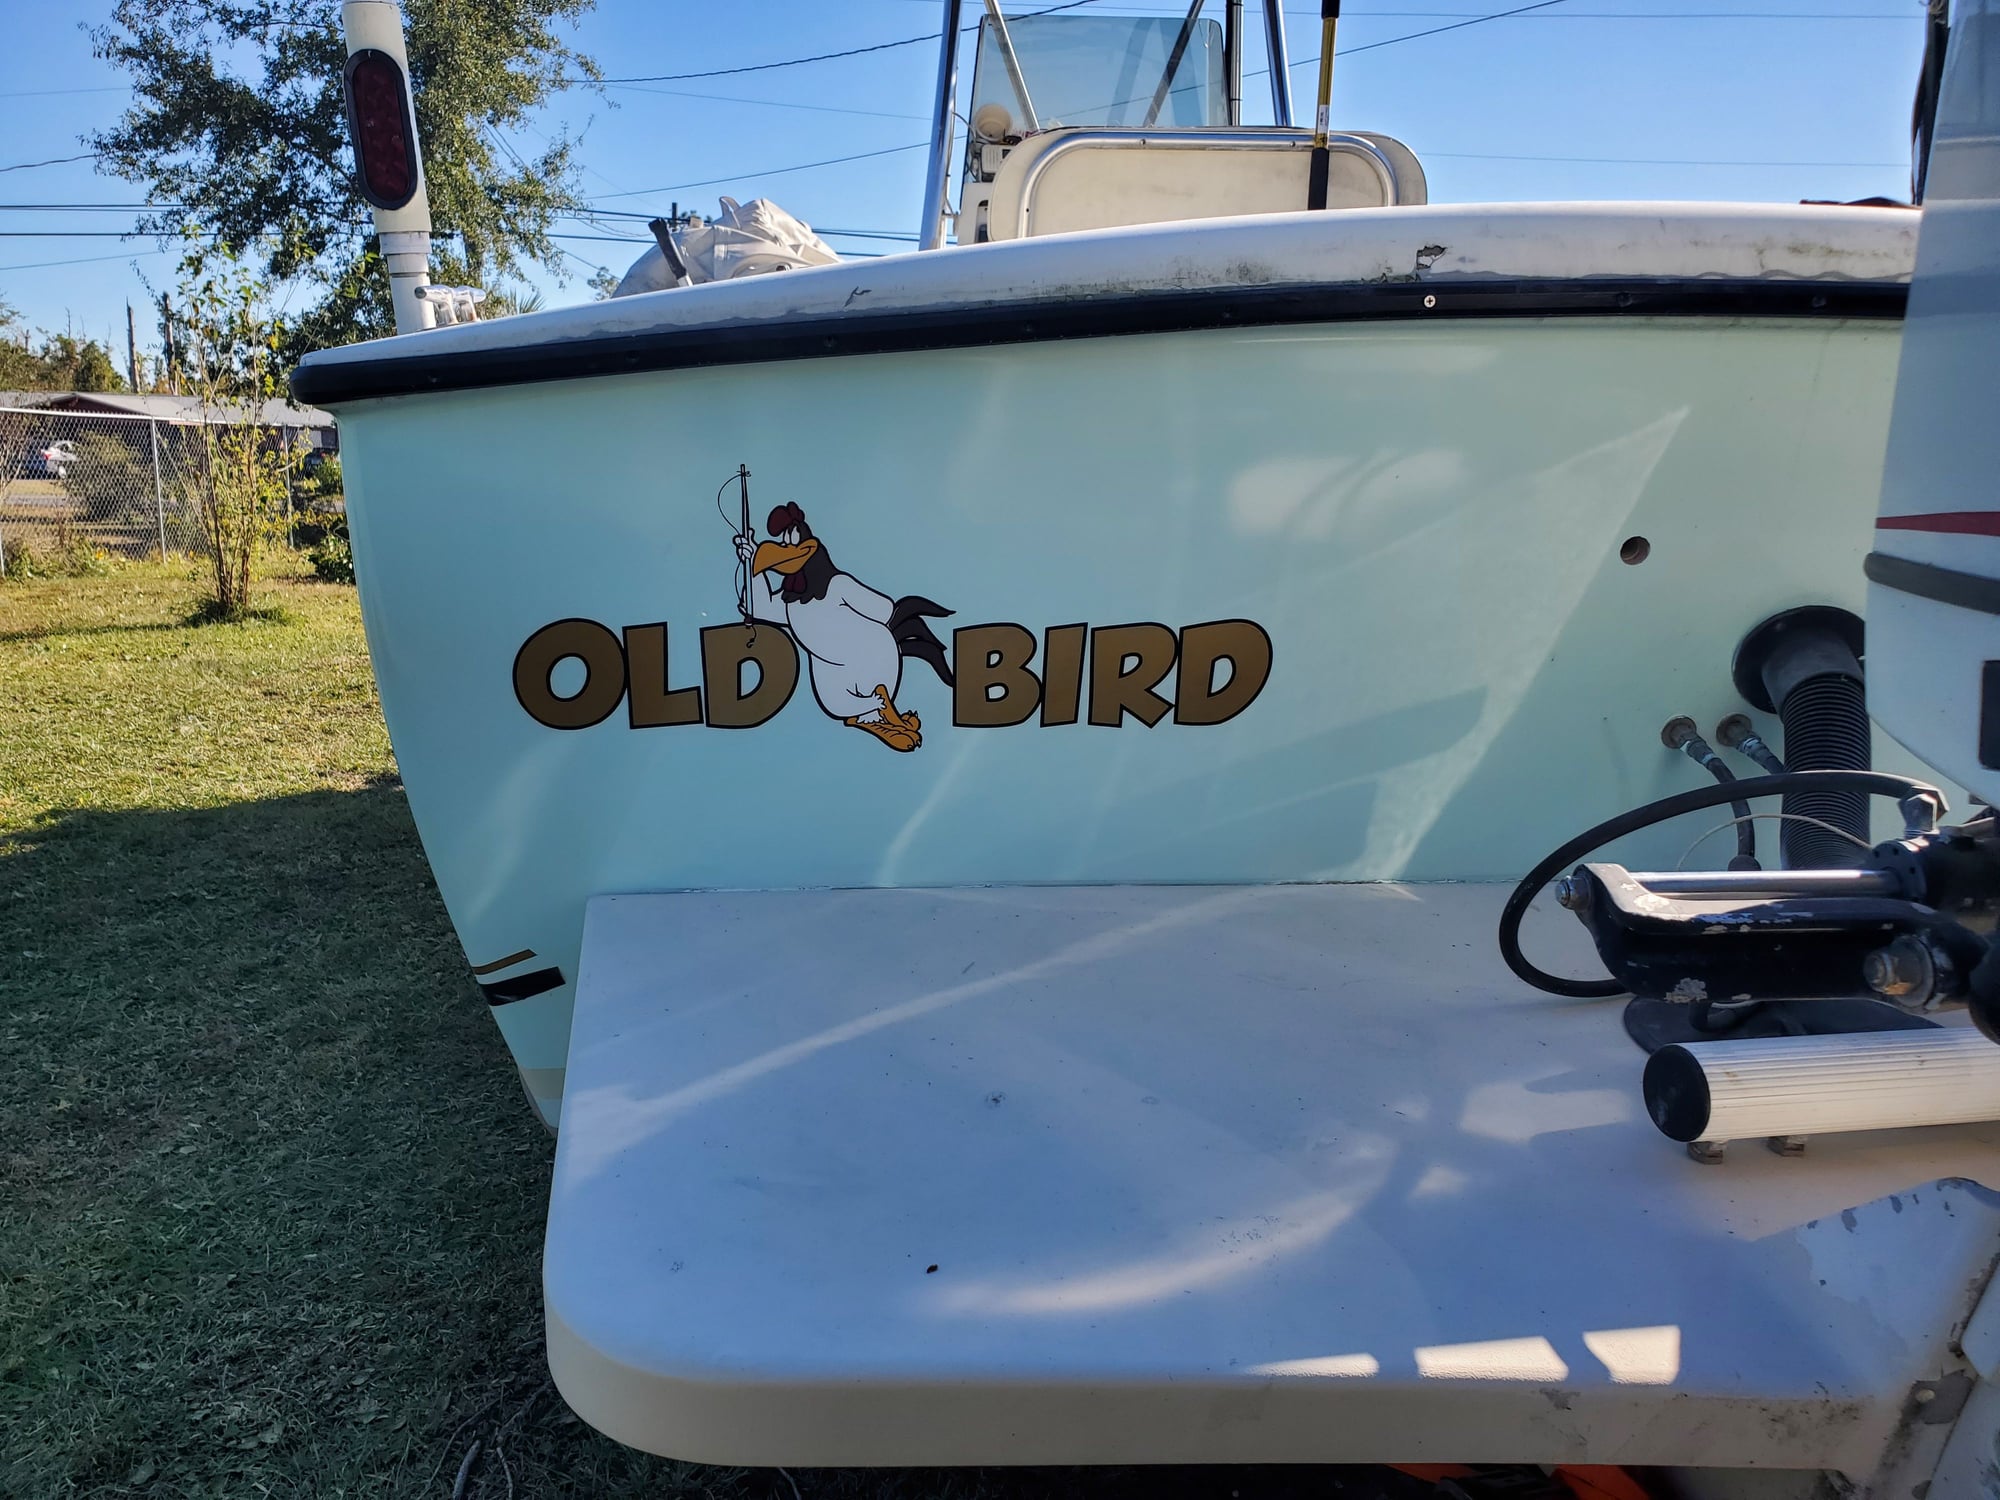 Vinyl boat names - The Hull Truth - Boating and Fishing Forum